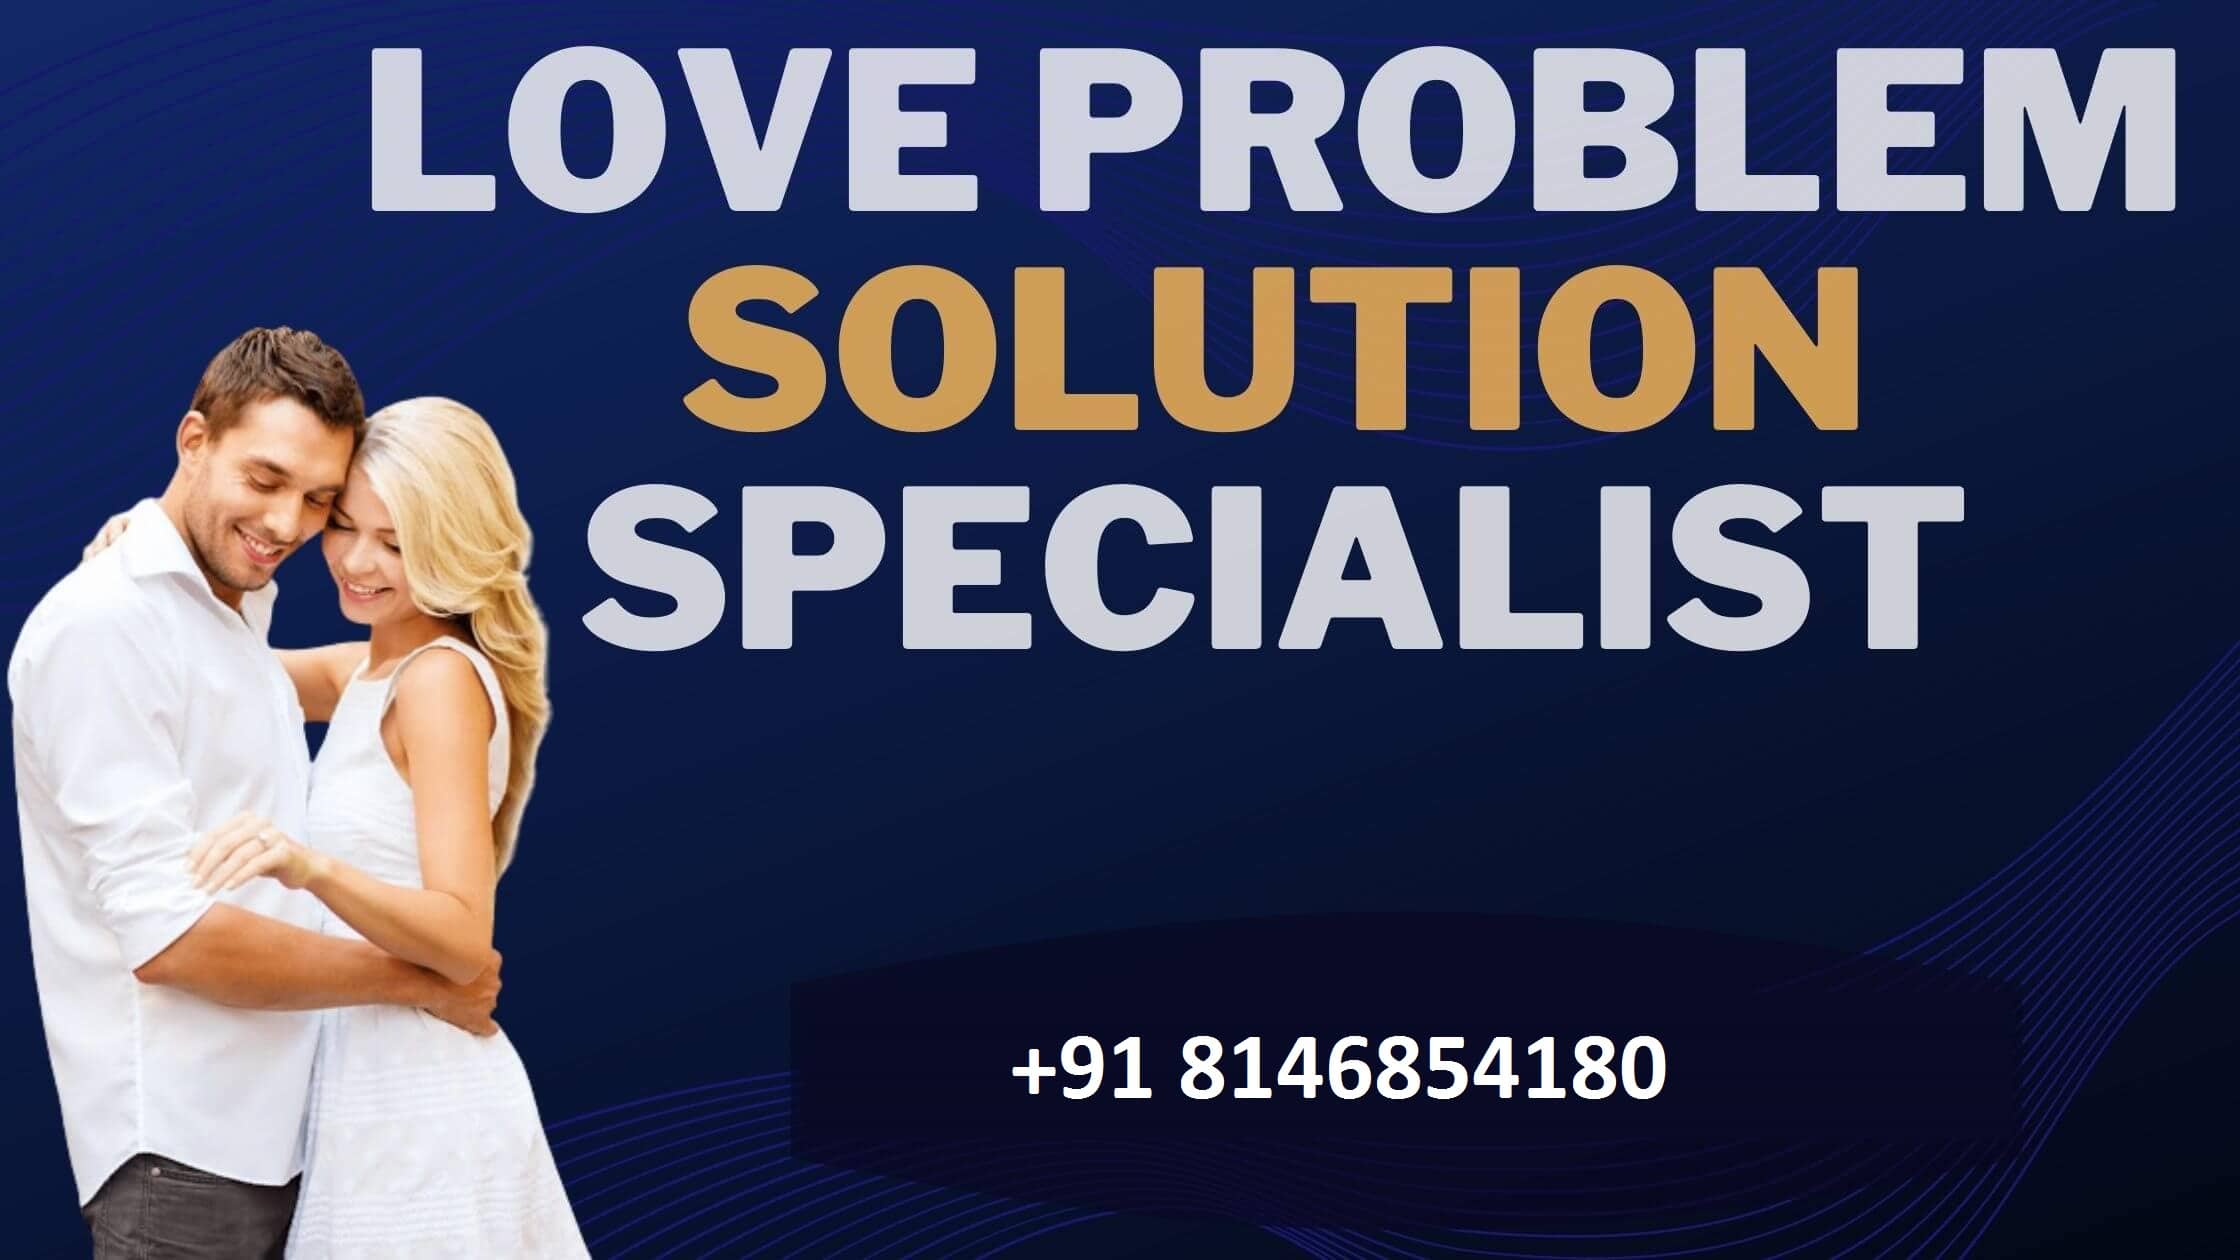 Love Problem Solution Specialist in Pune